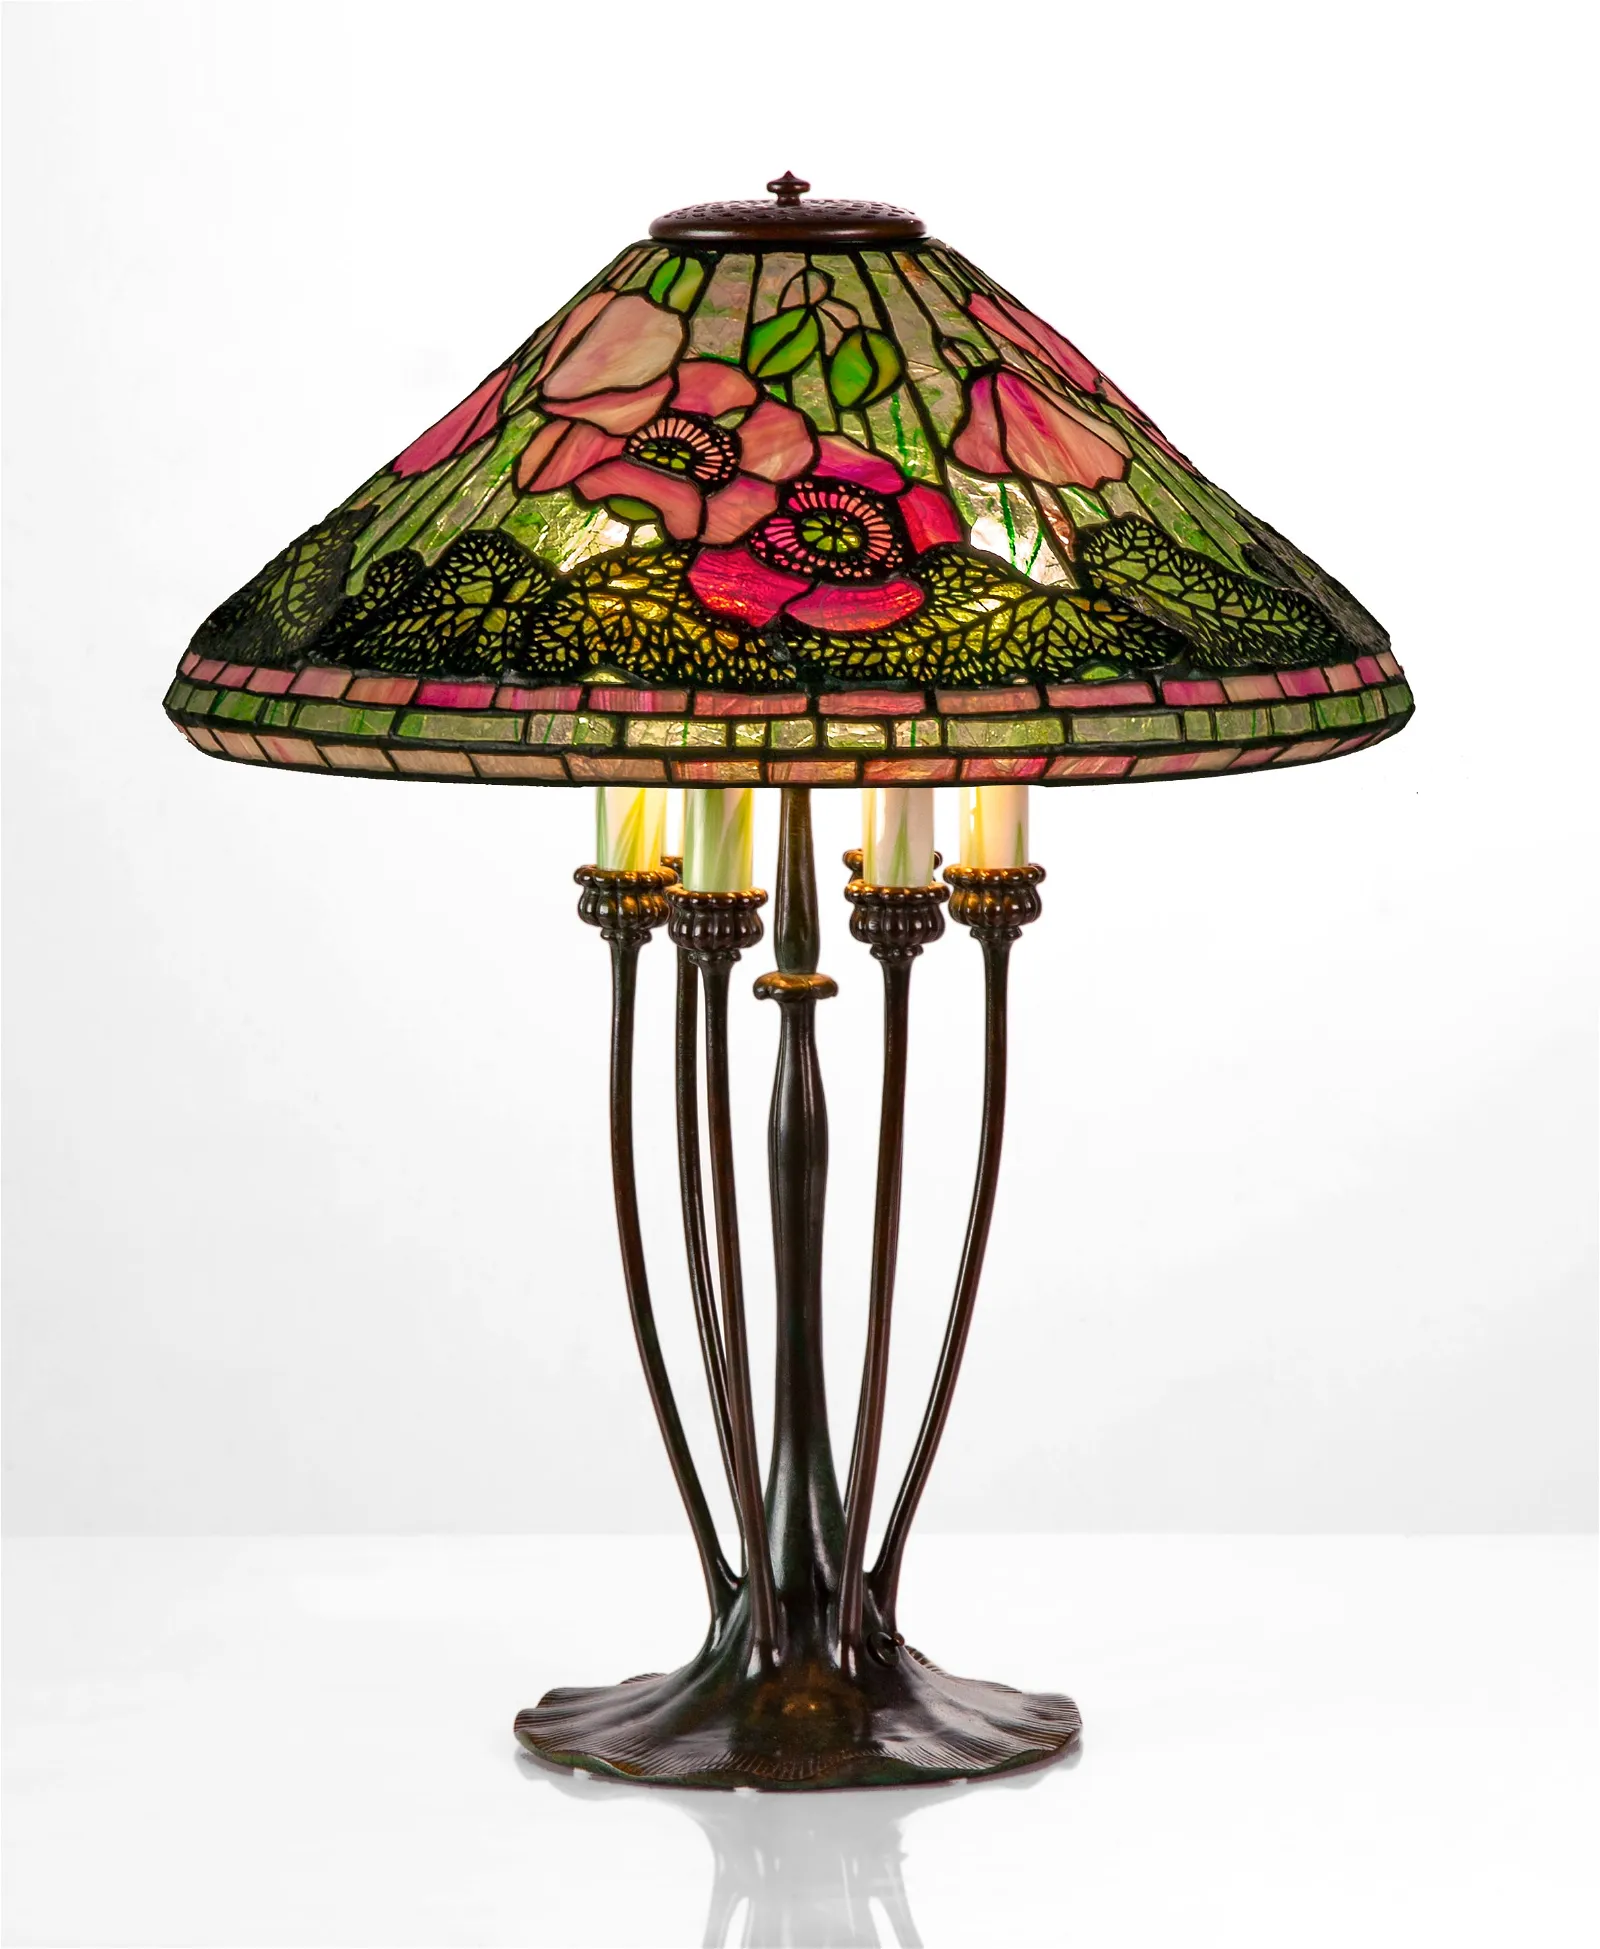 Tiffany lamps, Warhol, clocks and Bakelite radios were star performers at Cottone